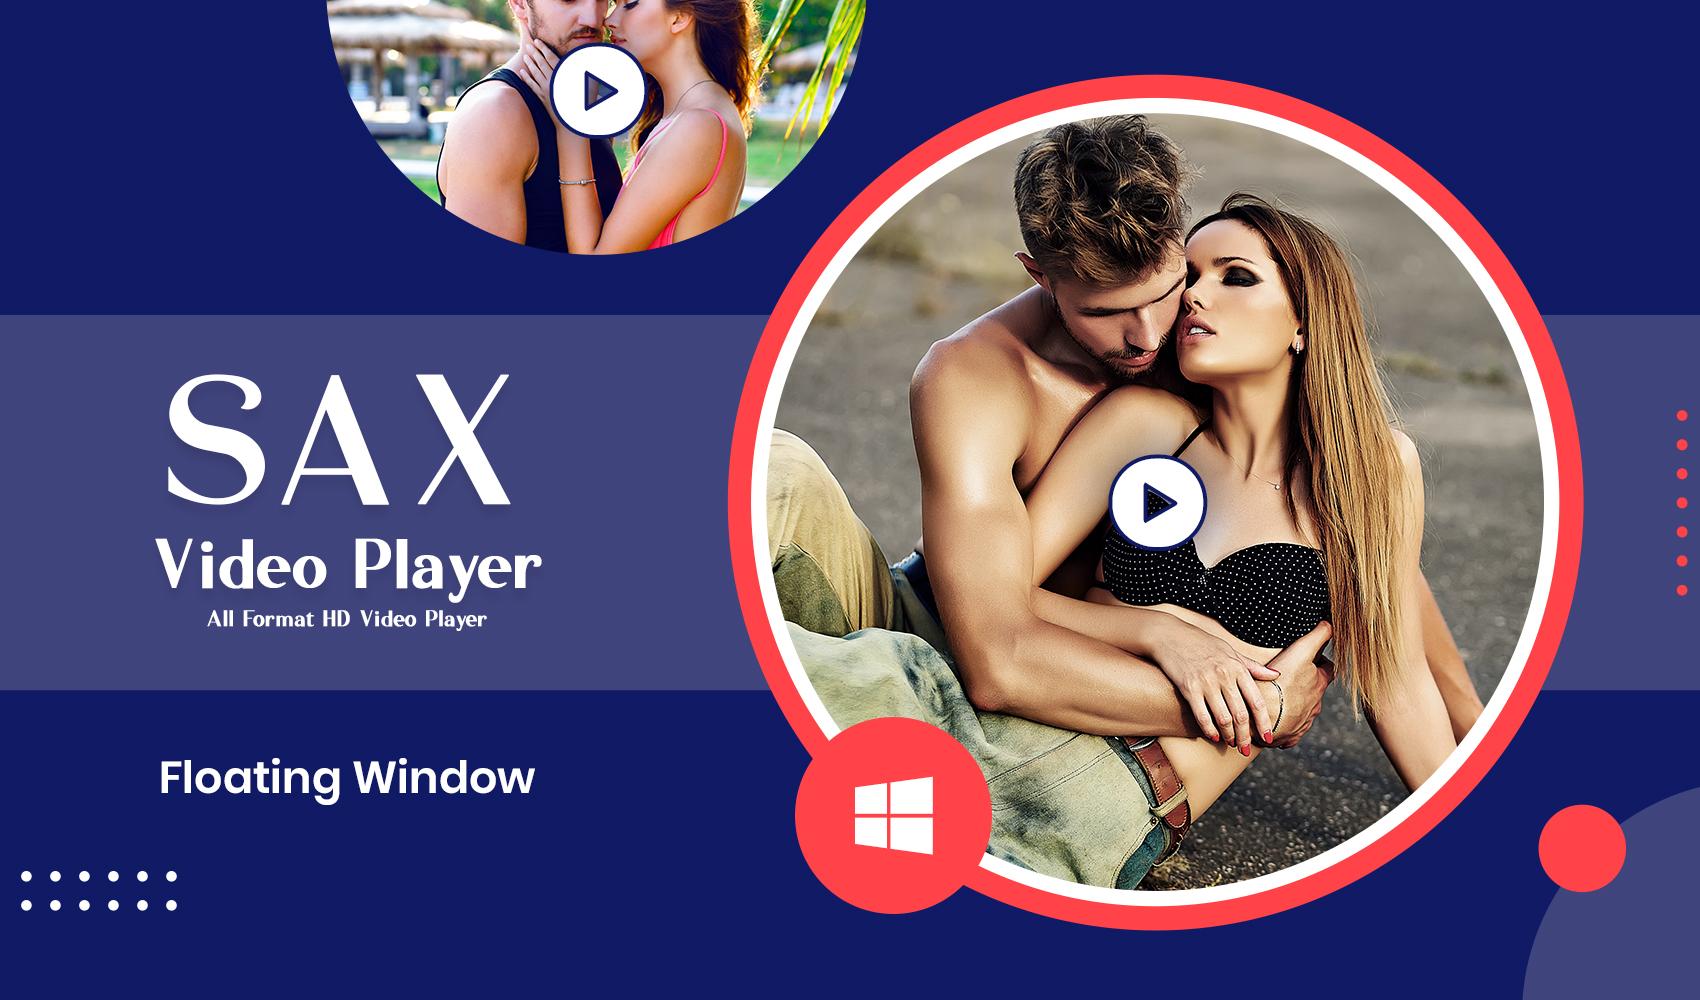 SAX Video Player - All in one Hd Format pro 2021 for Android - APK Download